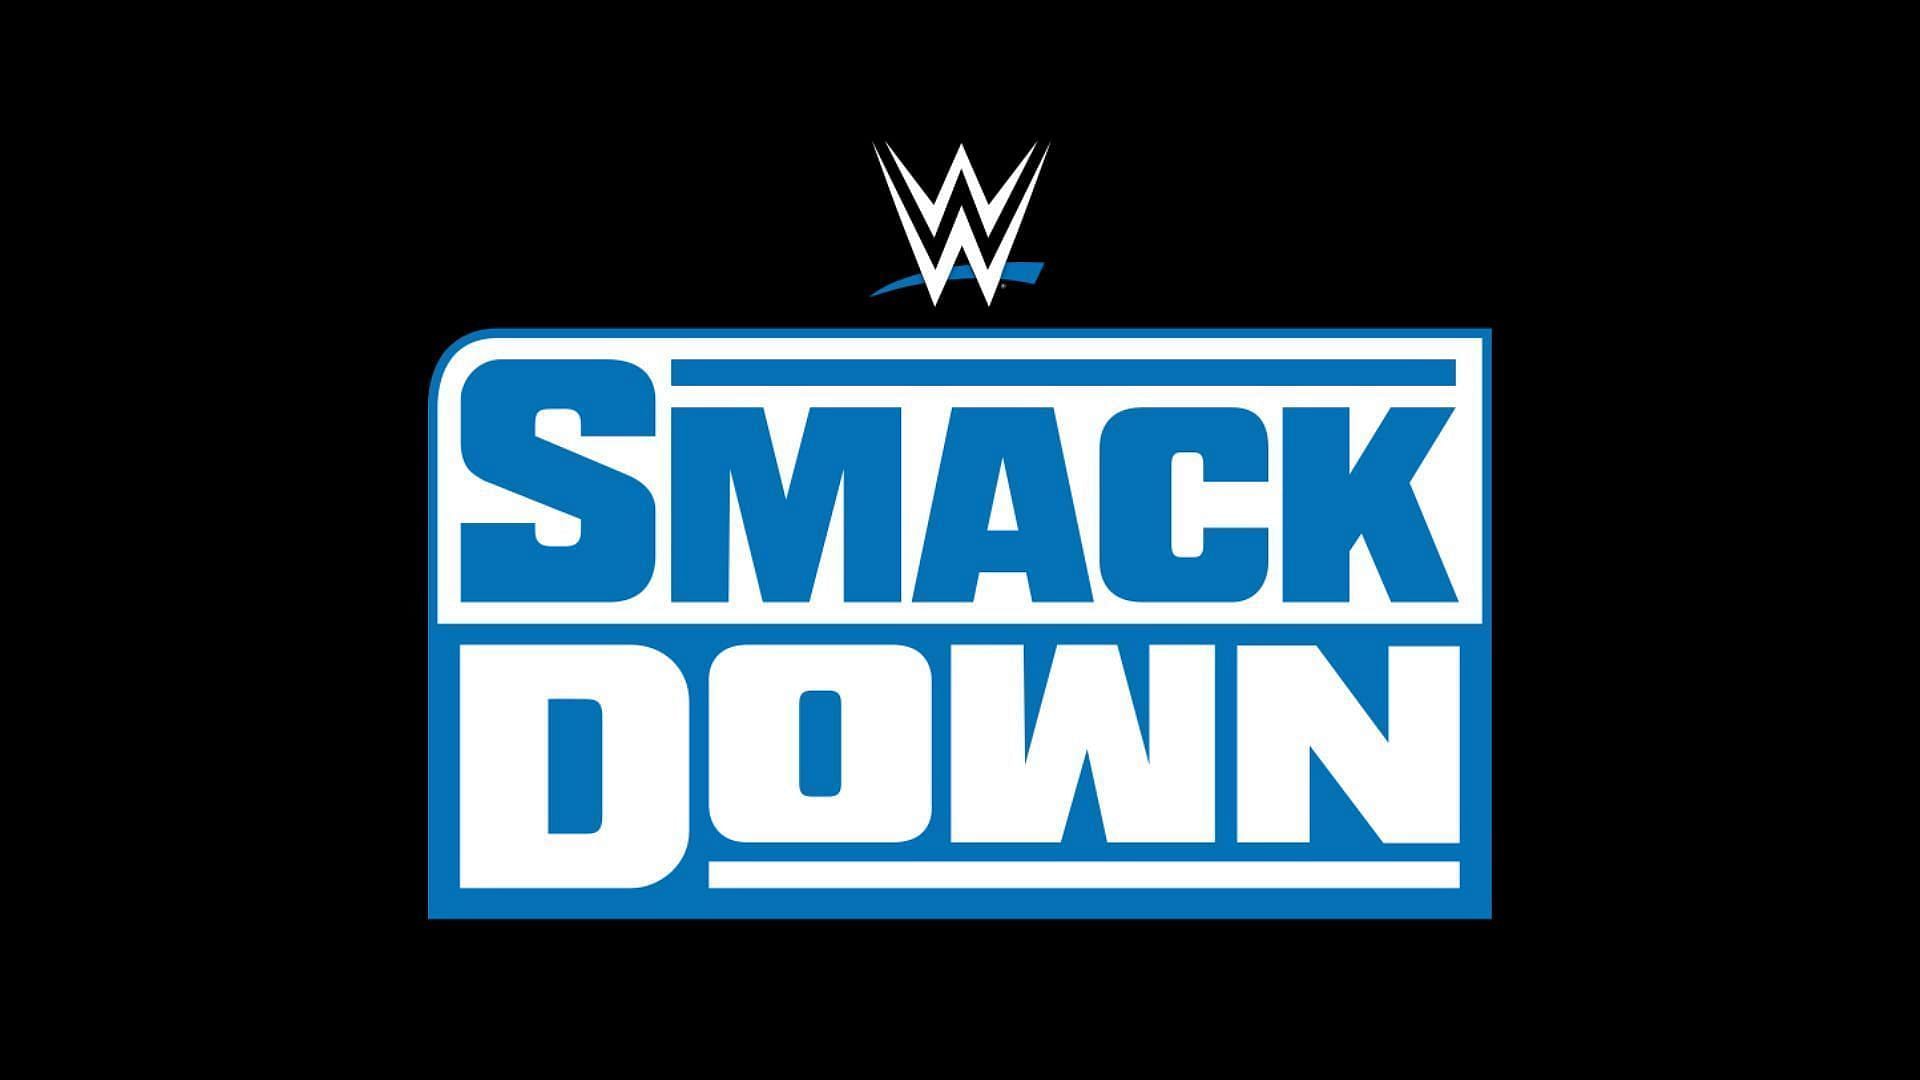 WWE SmackDown takes place on Fridays